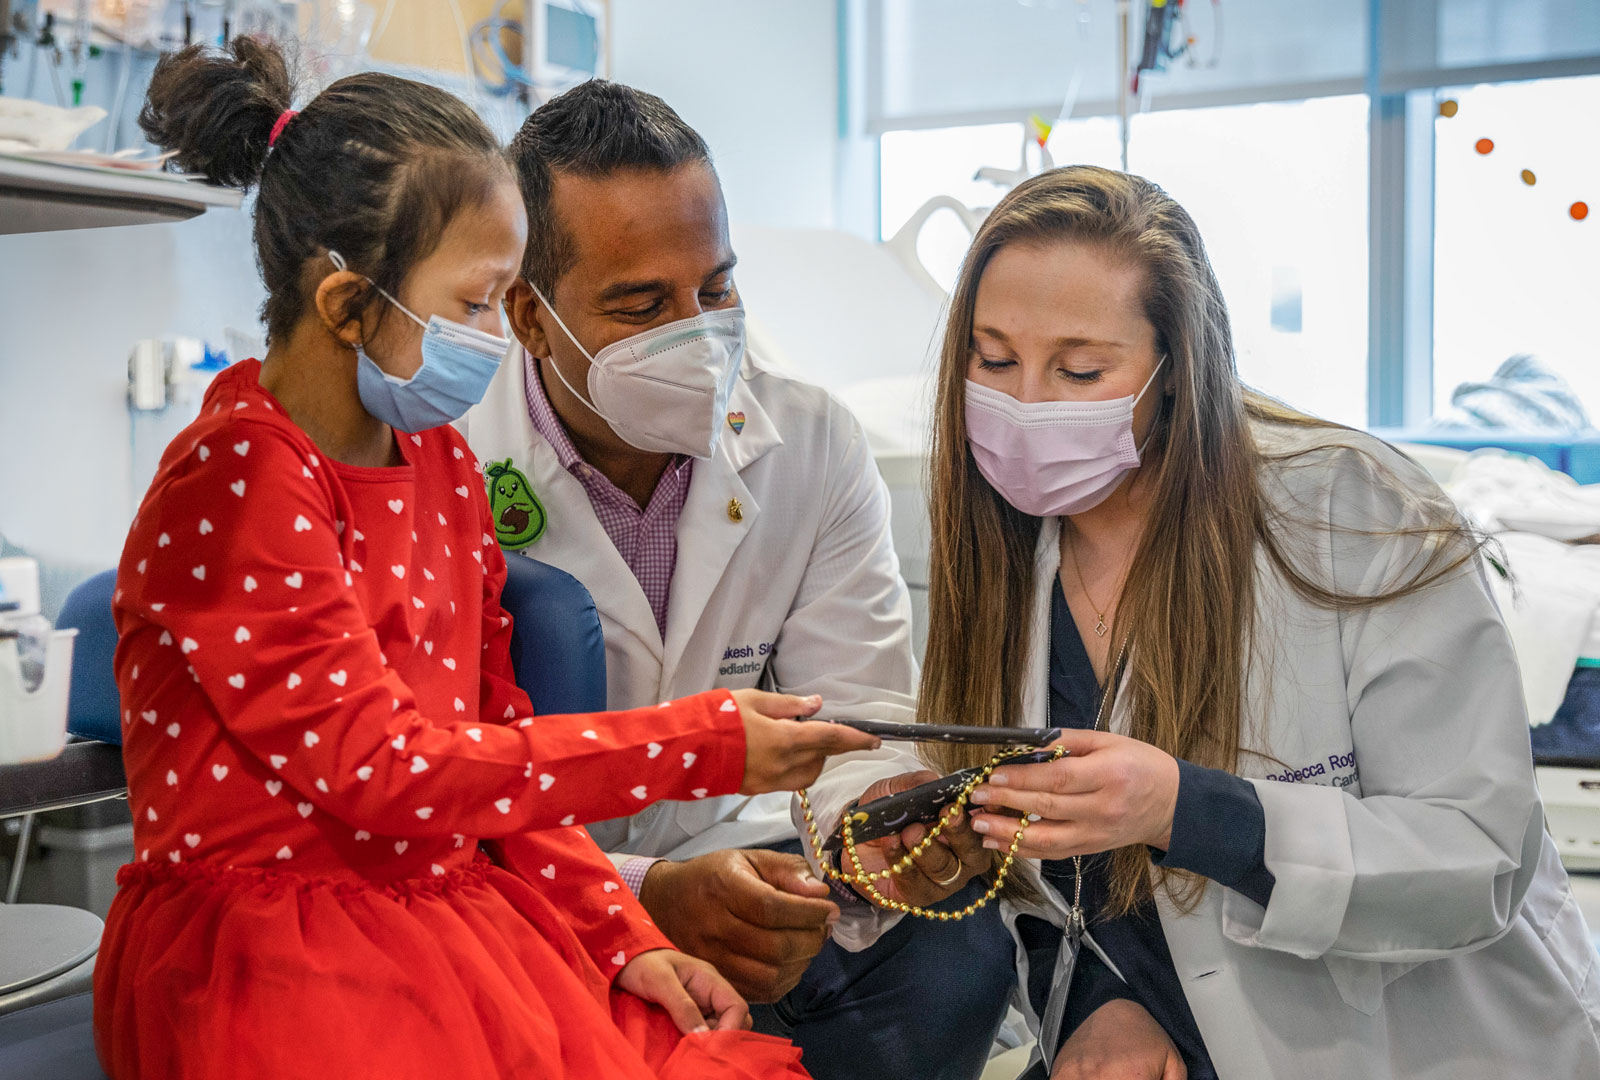 Delaney “Chi Chi” Soto, Who Received a Heart Transplant at age 9, Gives Thank-You Gifts to Dr. Rakesh Singh and Nurse Practitioner Rebecca Rogoff